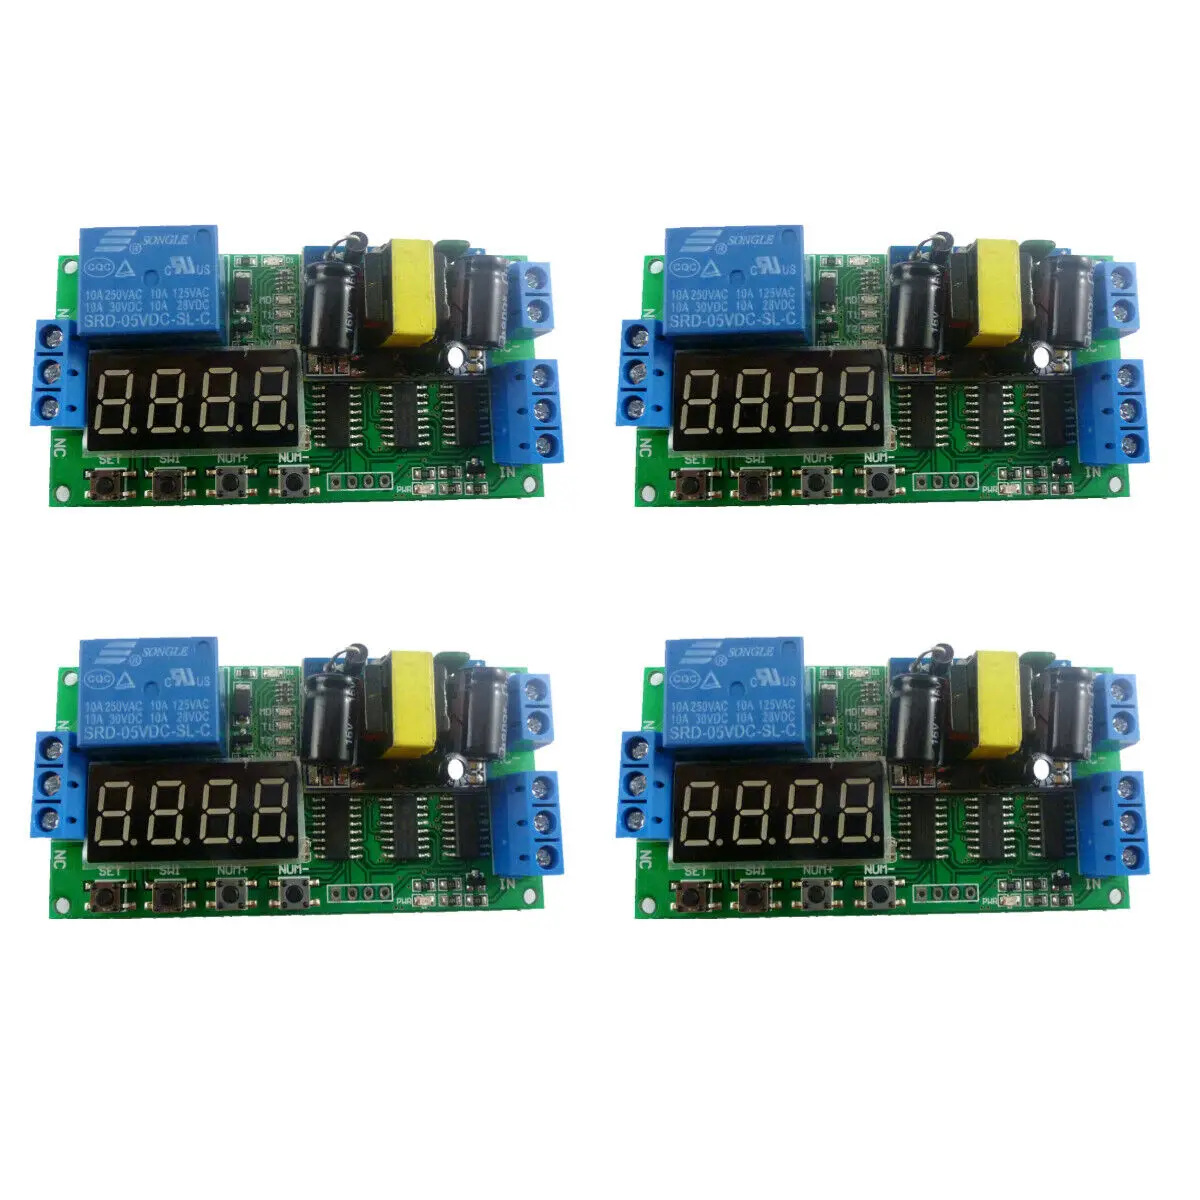 

AC 85-250V Multifunction Self-locking Relay PLC Cycle Timer Delay Timer Switch